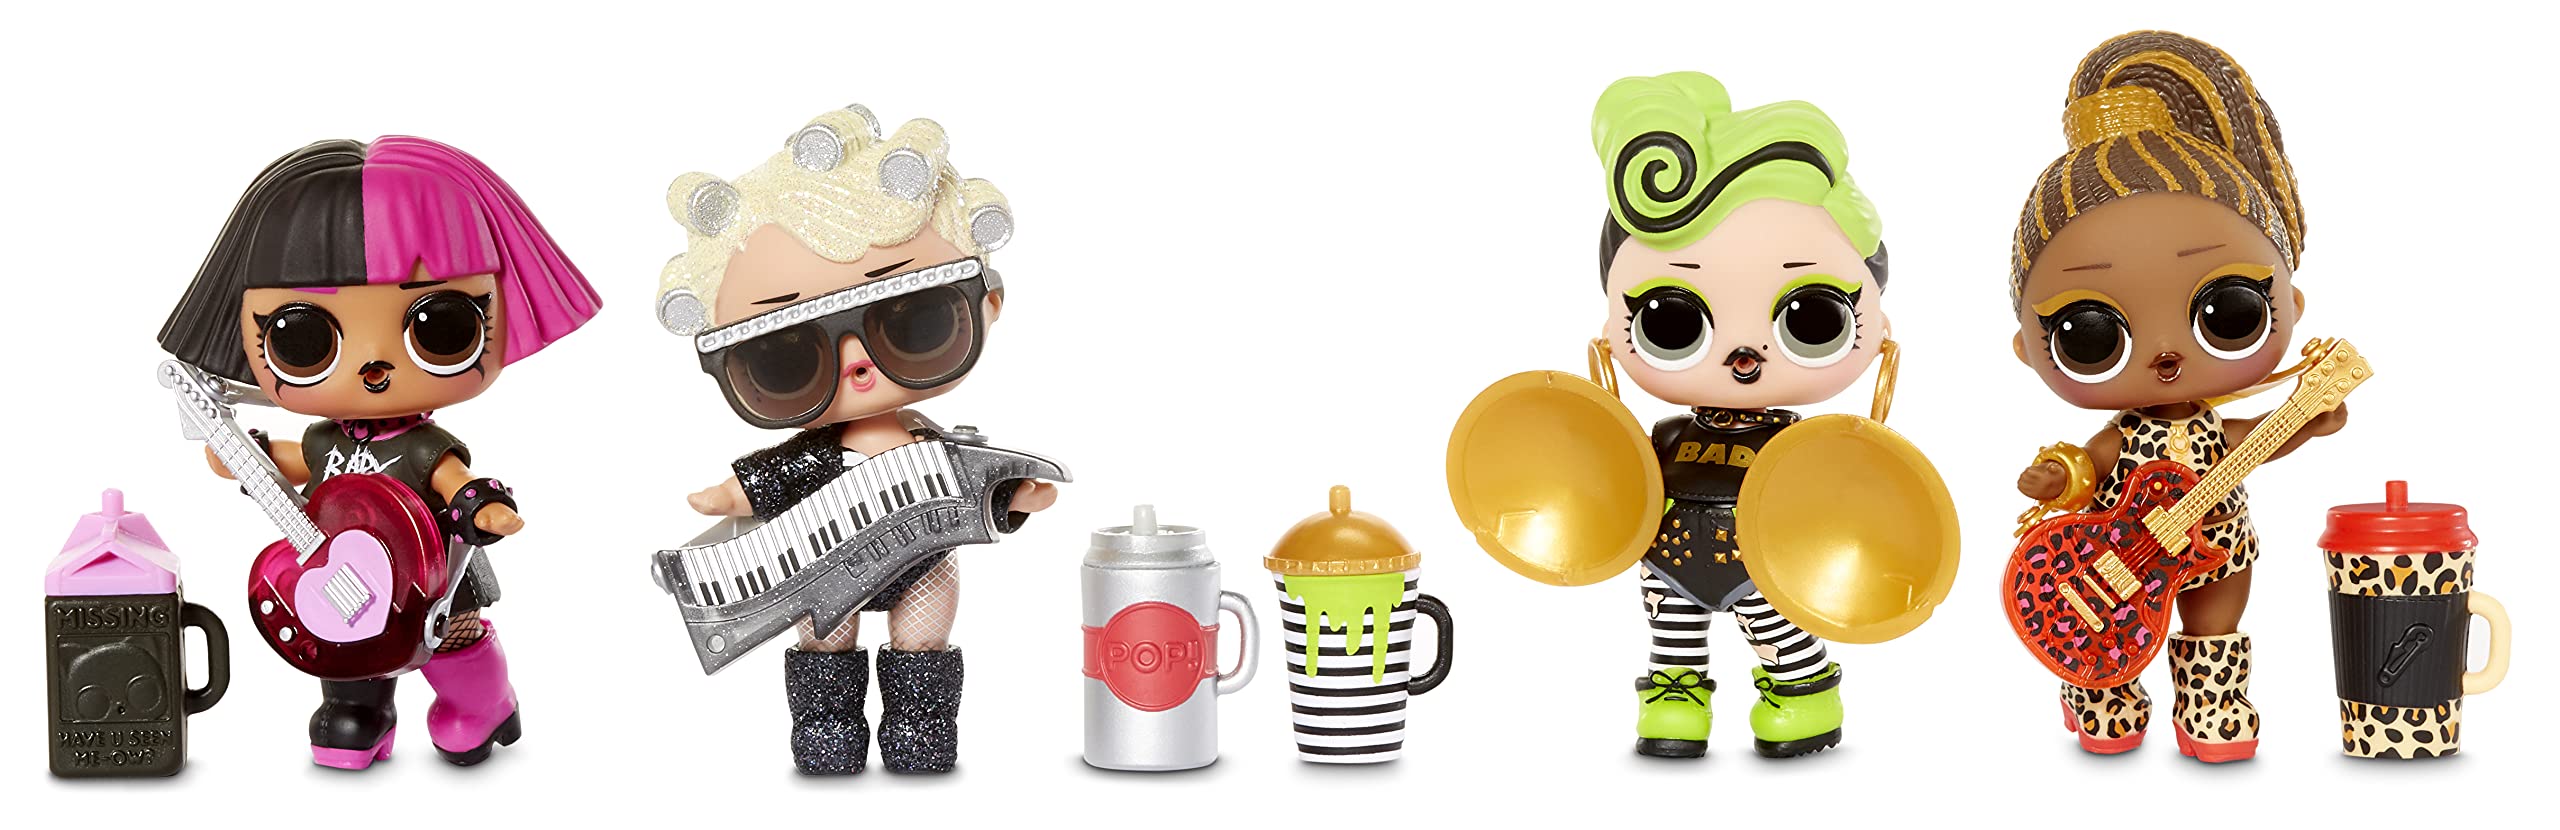 L.O.L. Surprise! Remix Rock Dolls Lil Sisters with 7 Surprises Including Instrument - Collectible Doll Toy, Gift for Kids, Toys for Girls and Boys Ages 4 5 6 7+ Years Old, Multi color